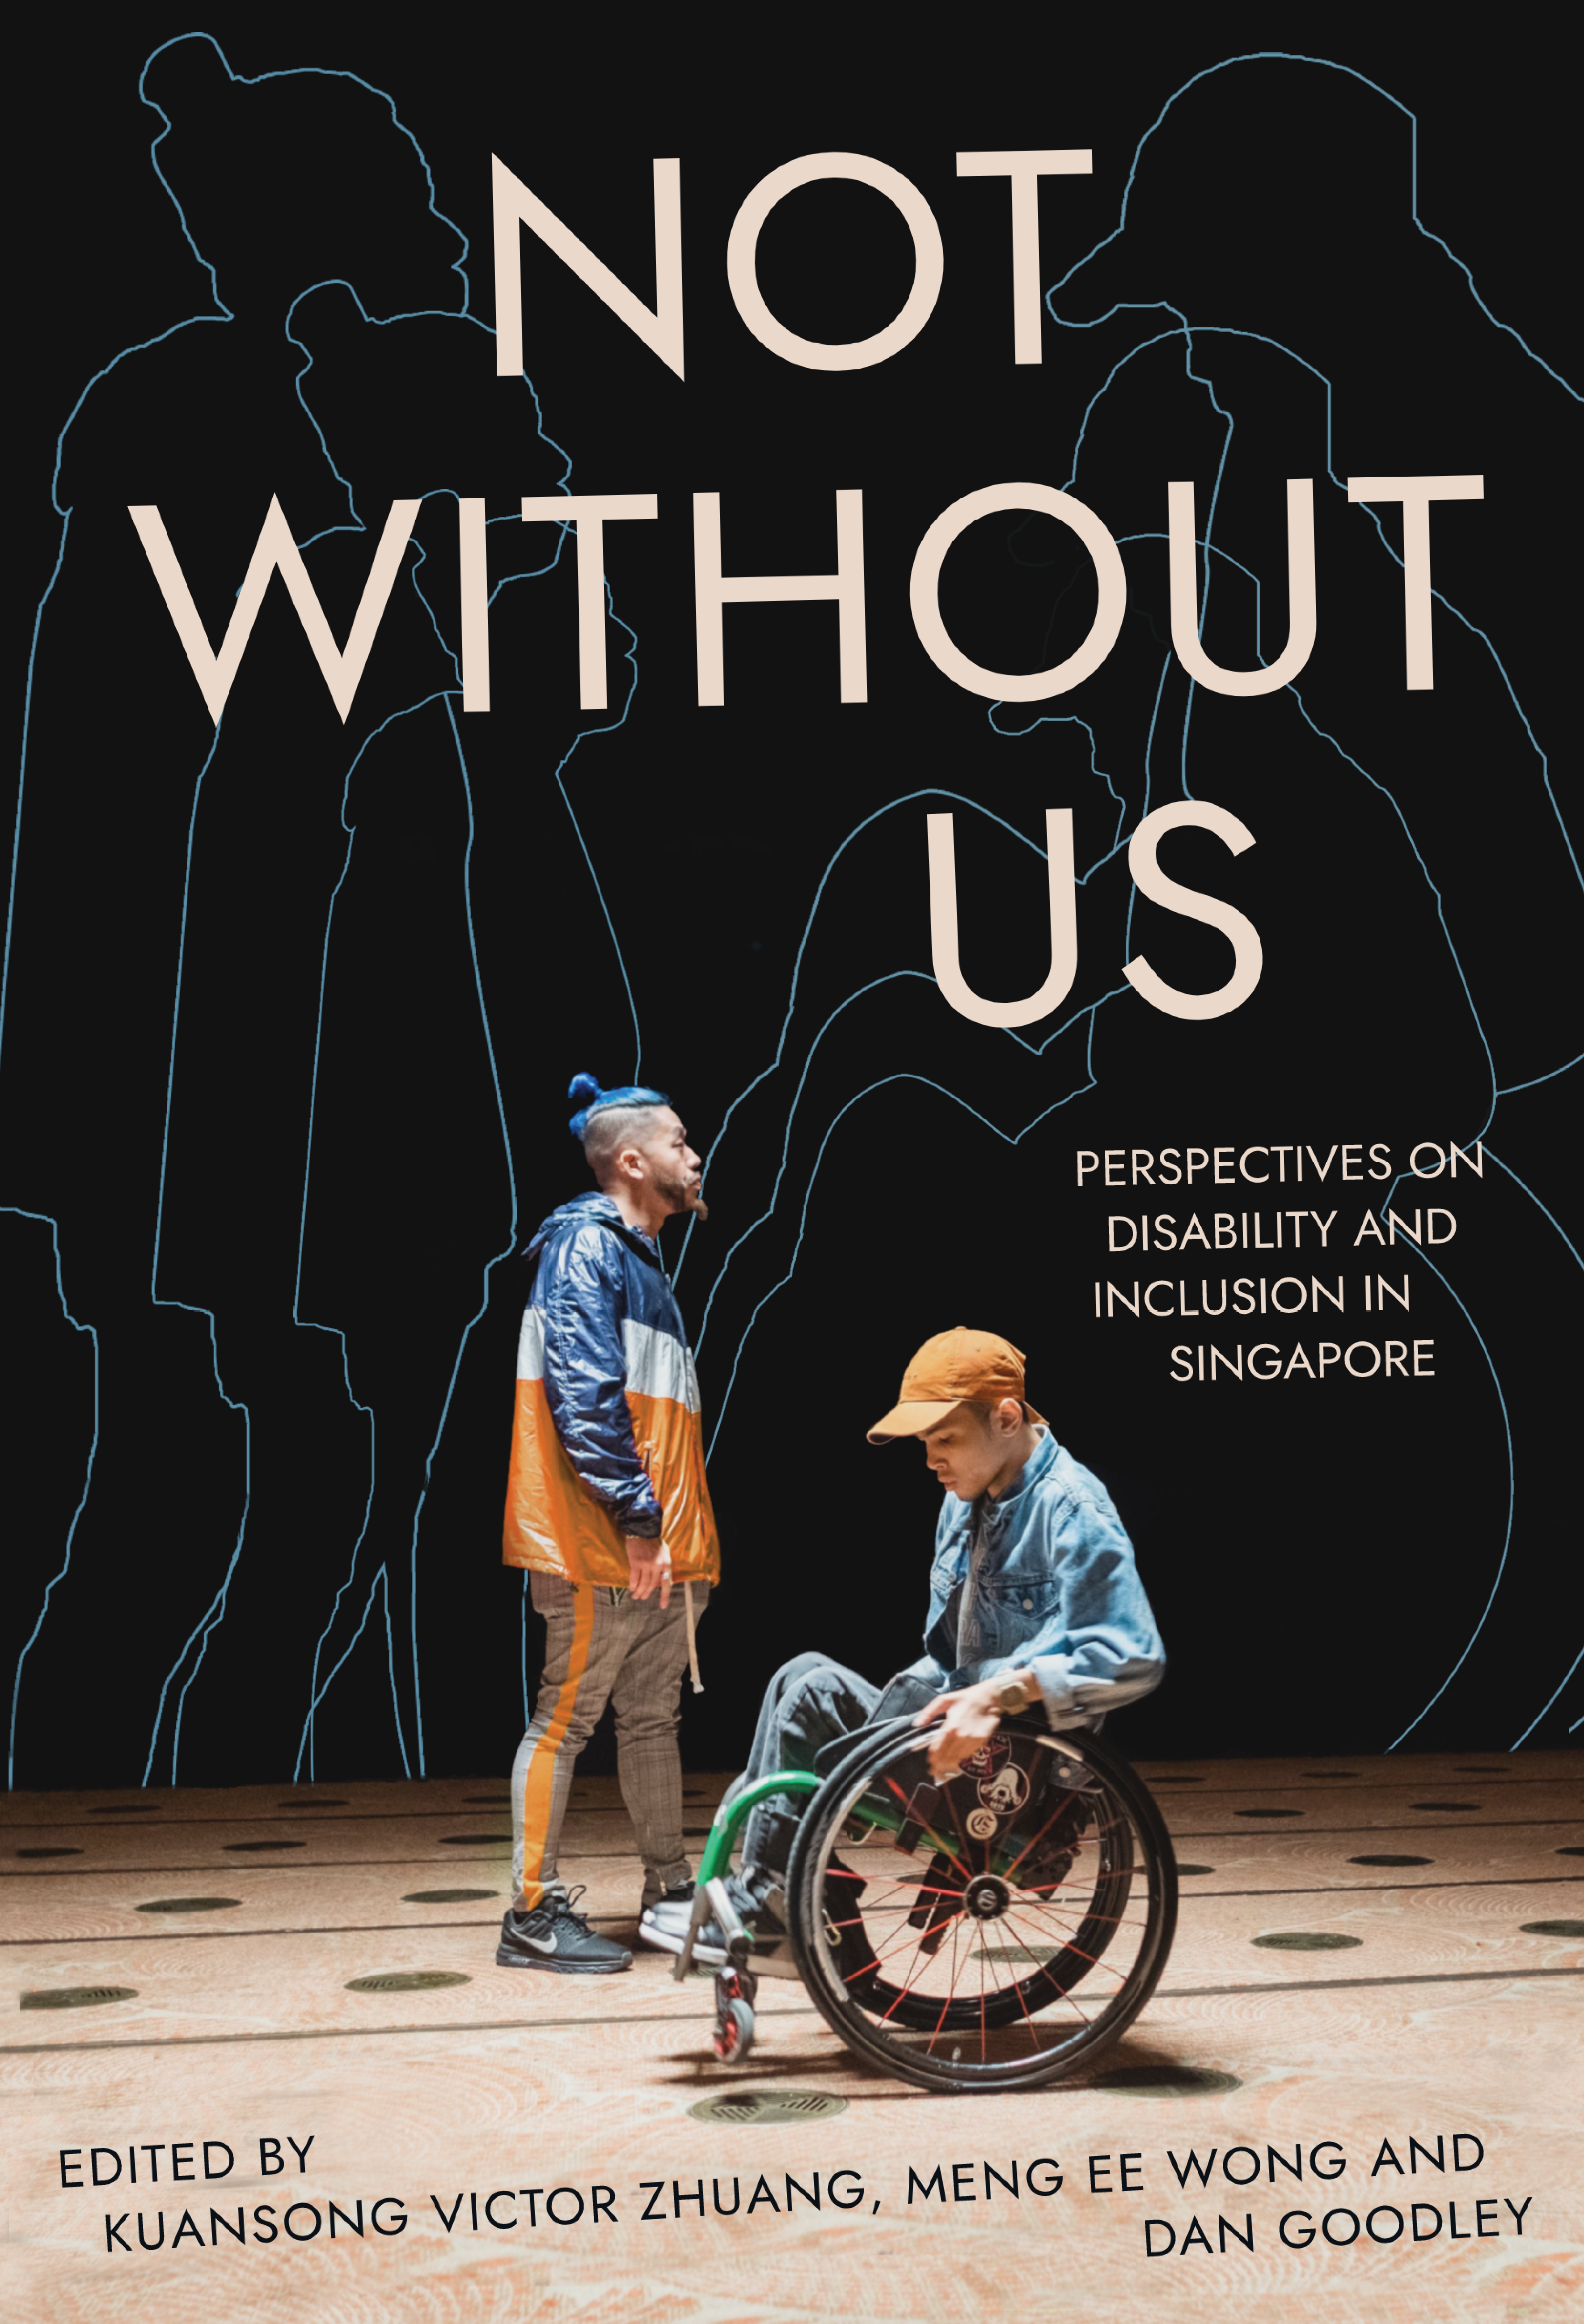 in　Singapore　Disability　Ethos　Us:　Not　on　and　–　Without　Books　Perspectives　Inclusion